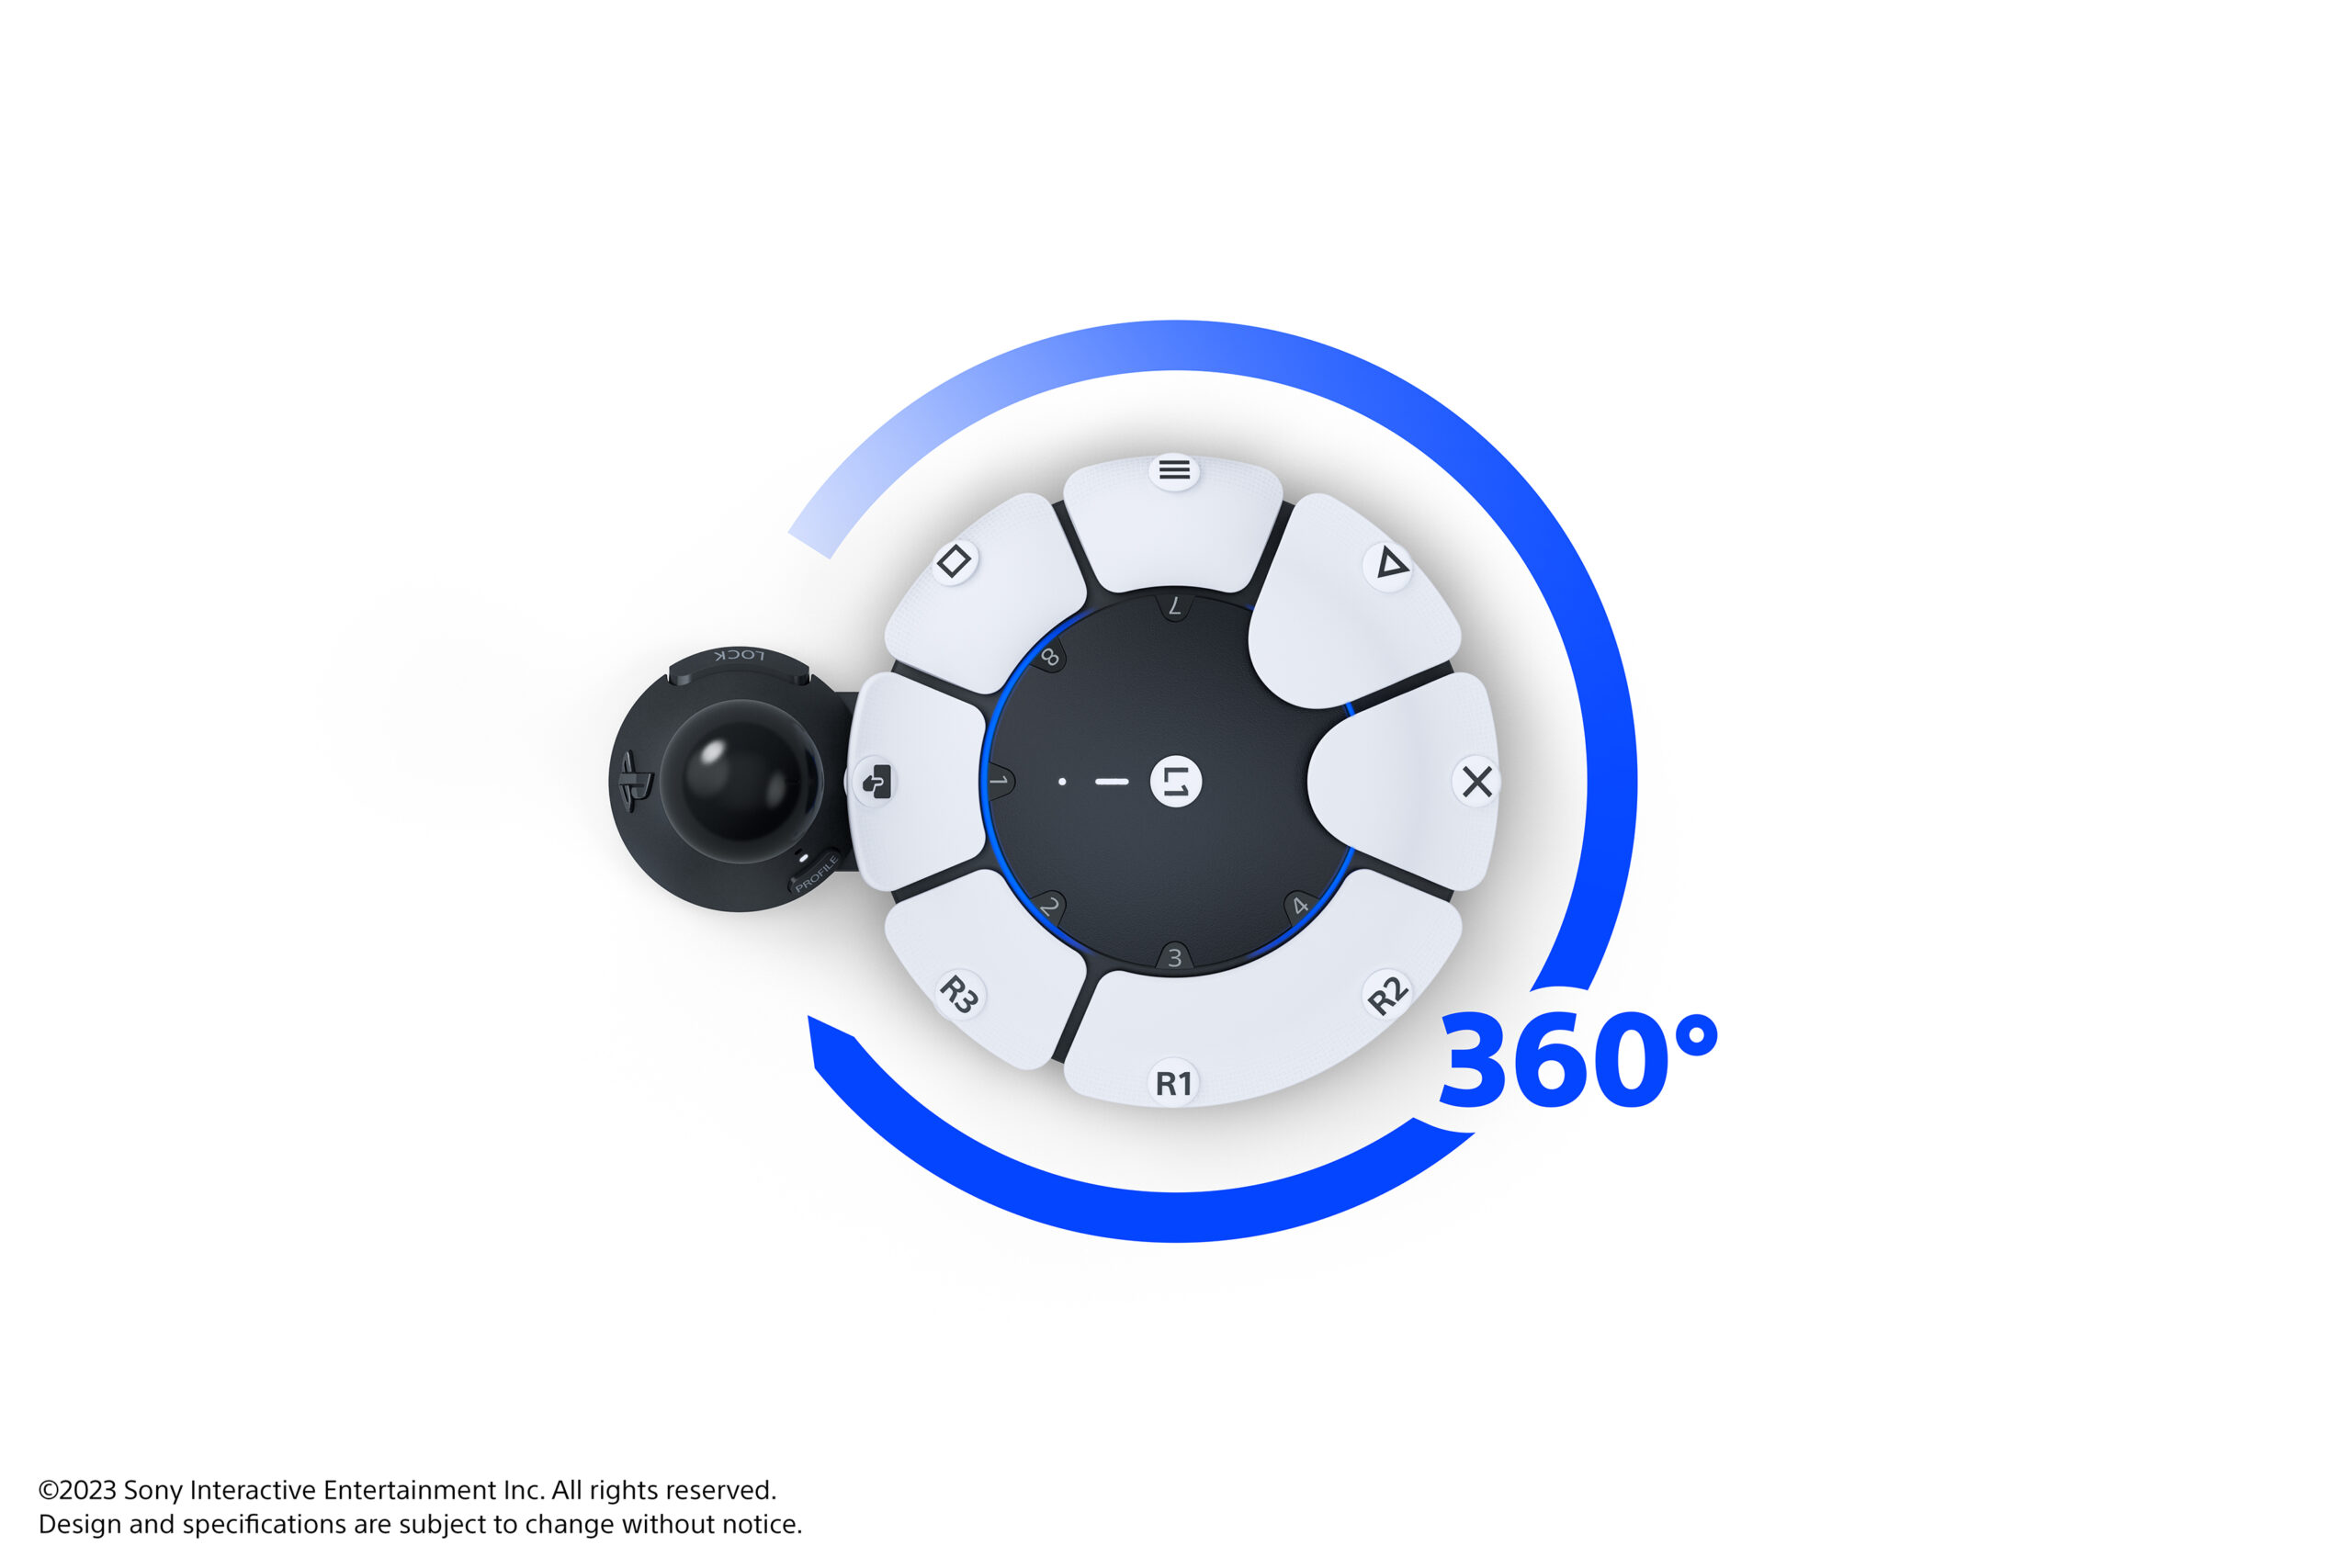  "An image showing the 360-degree orientation options for an access controller"